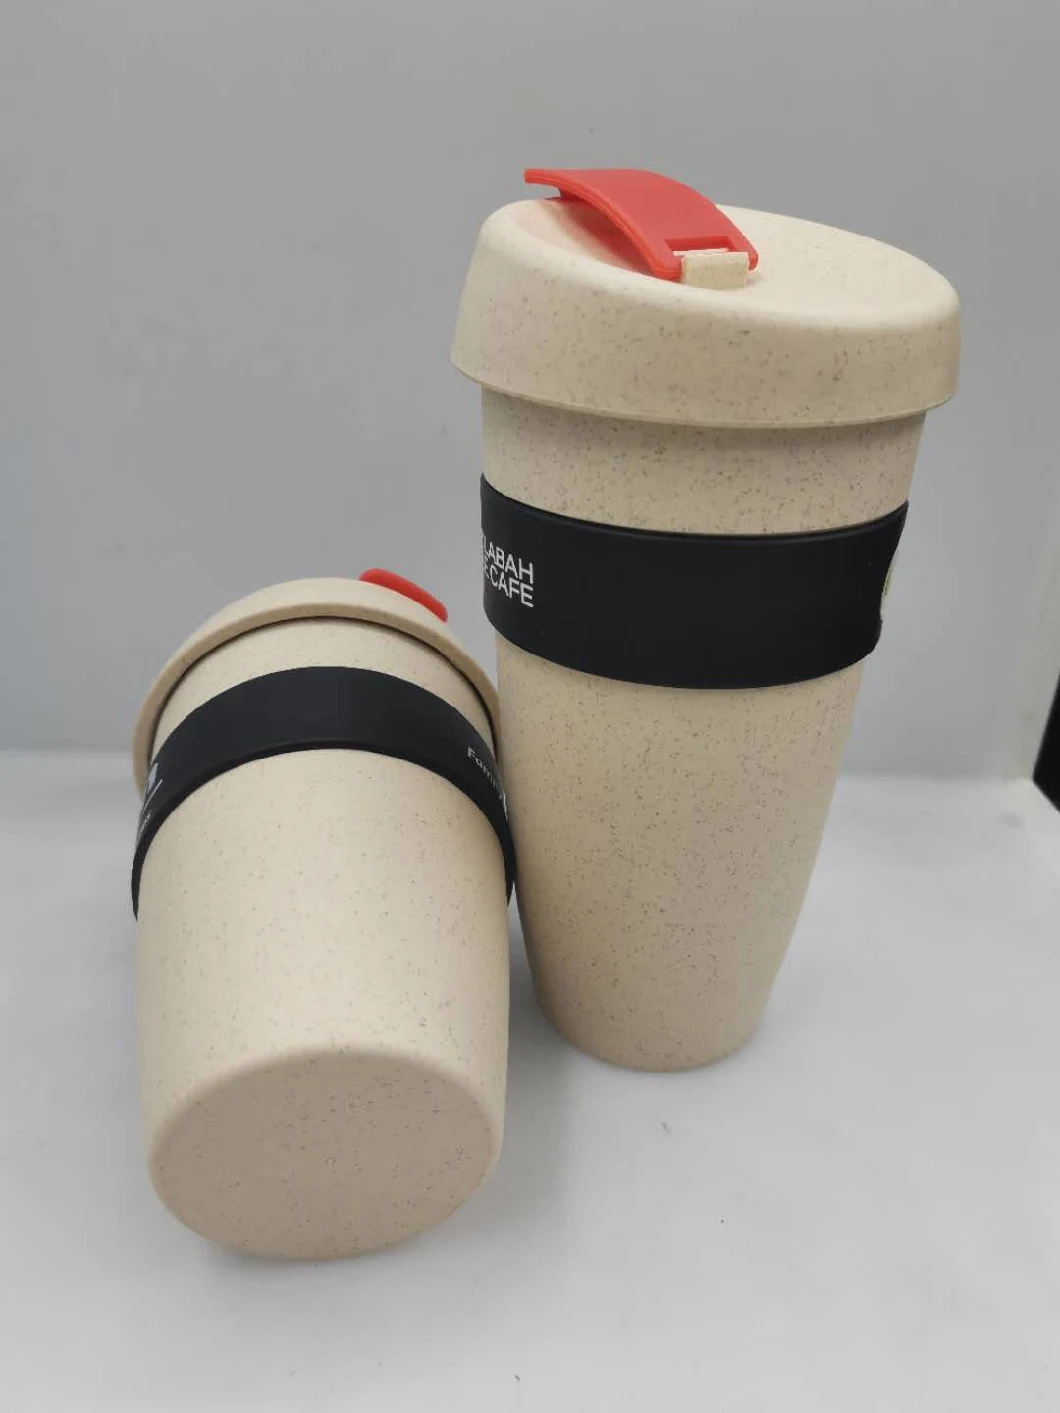 High Quality Wheat Straw Traveling Eco Bamboo Fiber Coffee Cup with Silicone Lid Coffee Mugs